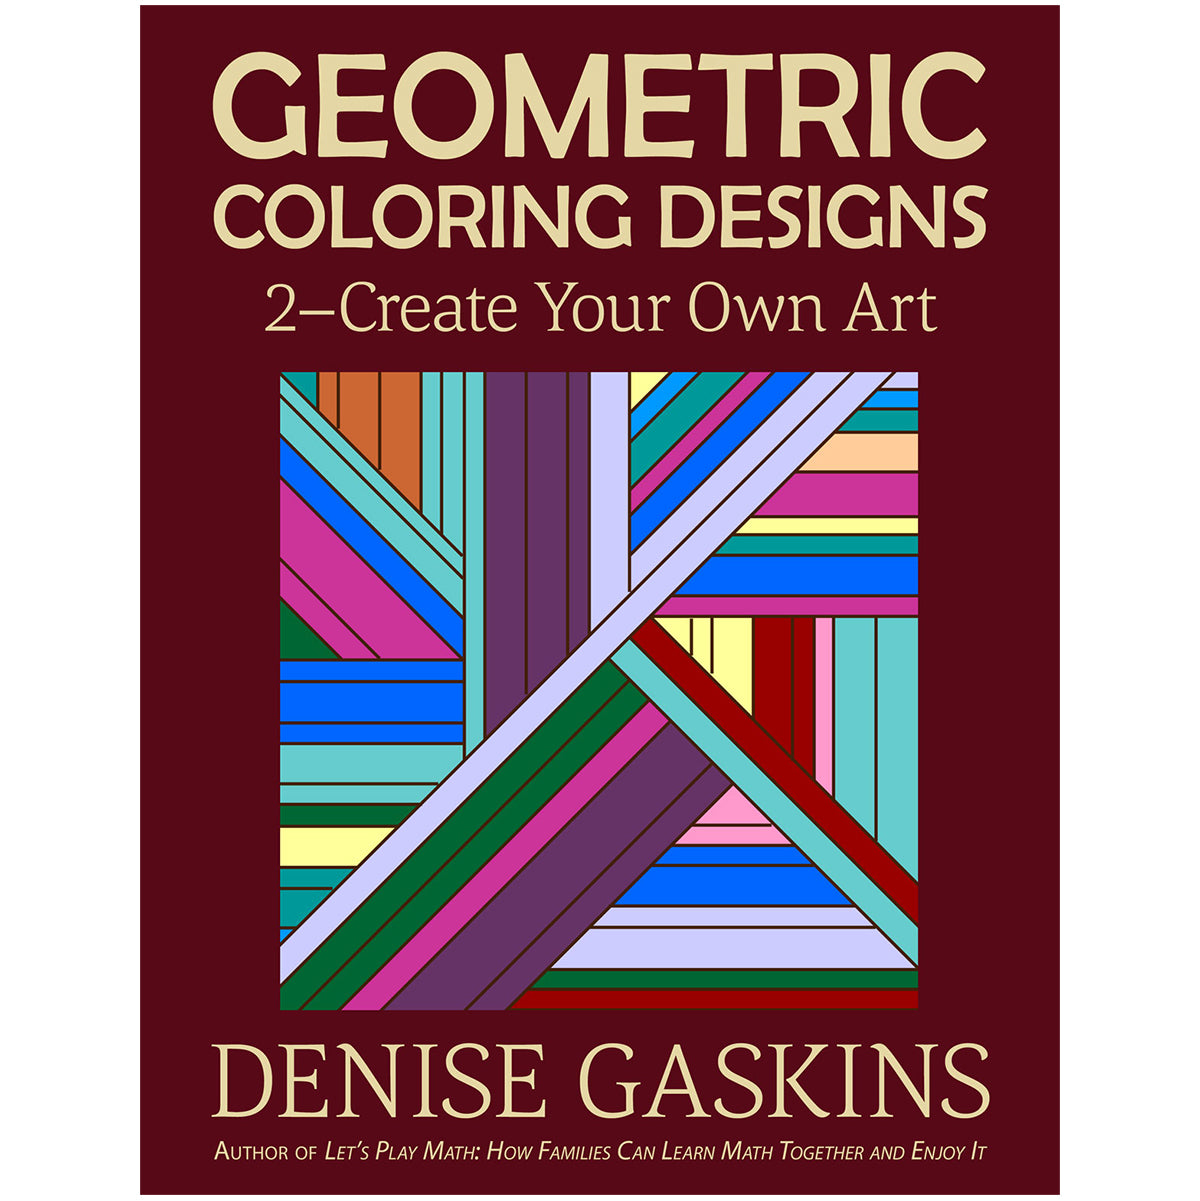 Create Your Own geometric coloring designs math art printable activity book by Denise Gaskins